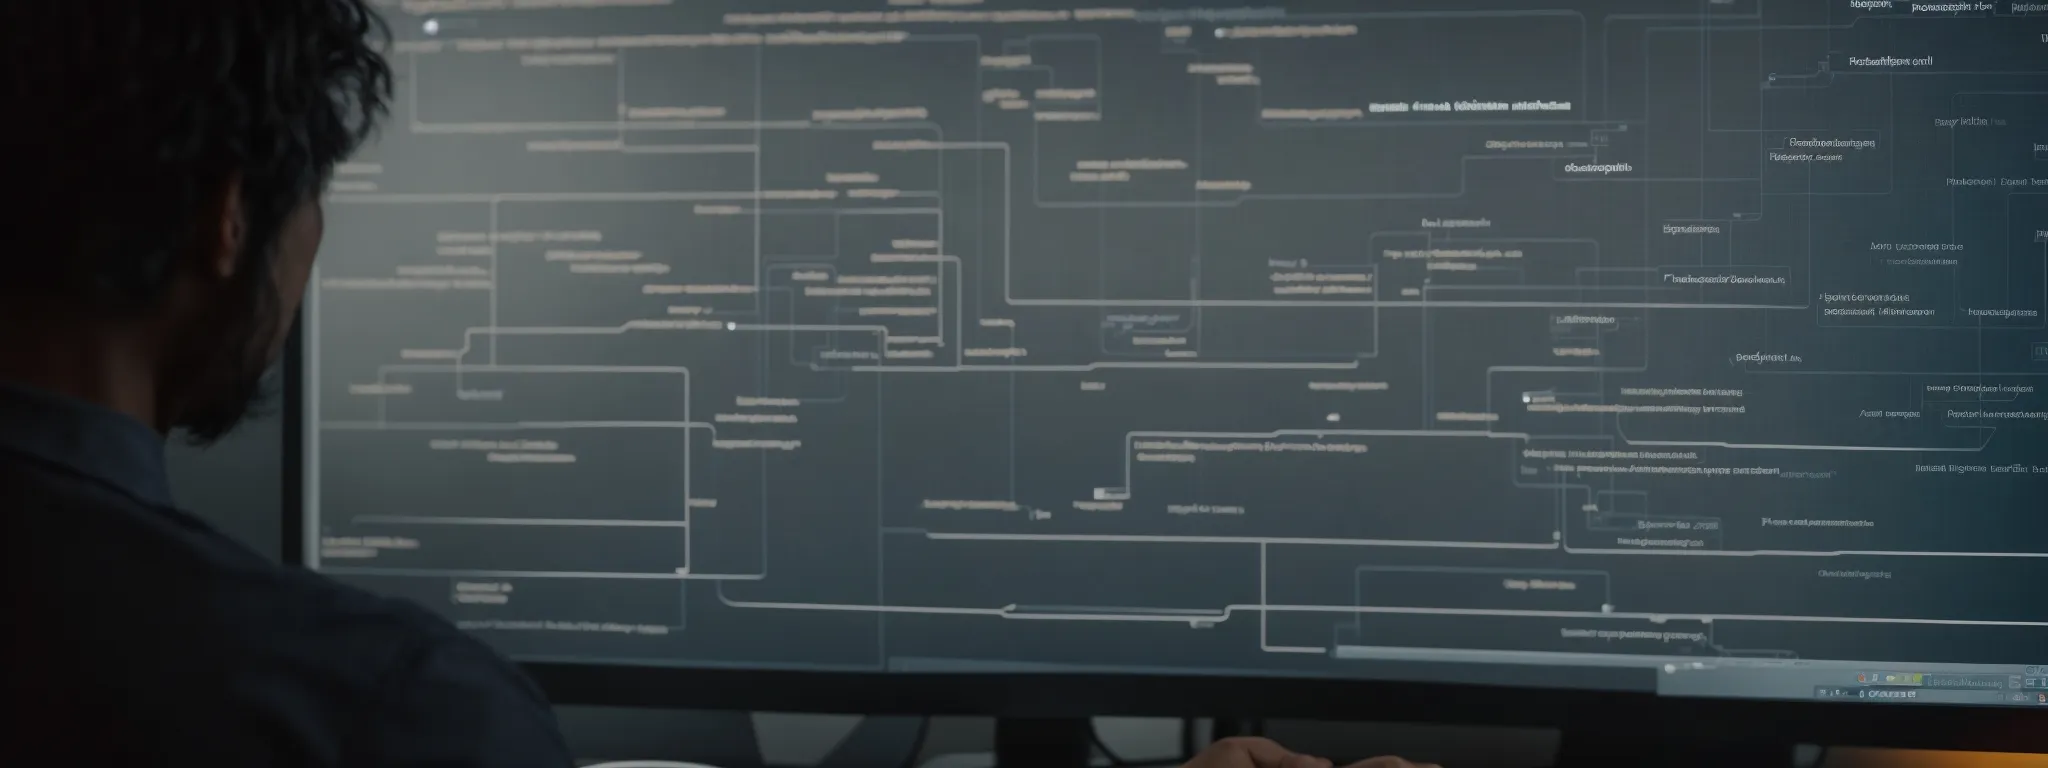 a web developer reviews a flowchart outlining website structure and content categories on a computer screen.